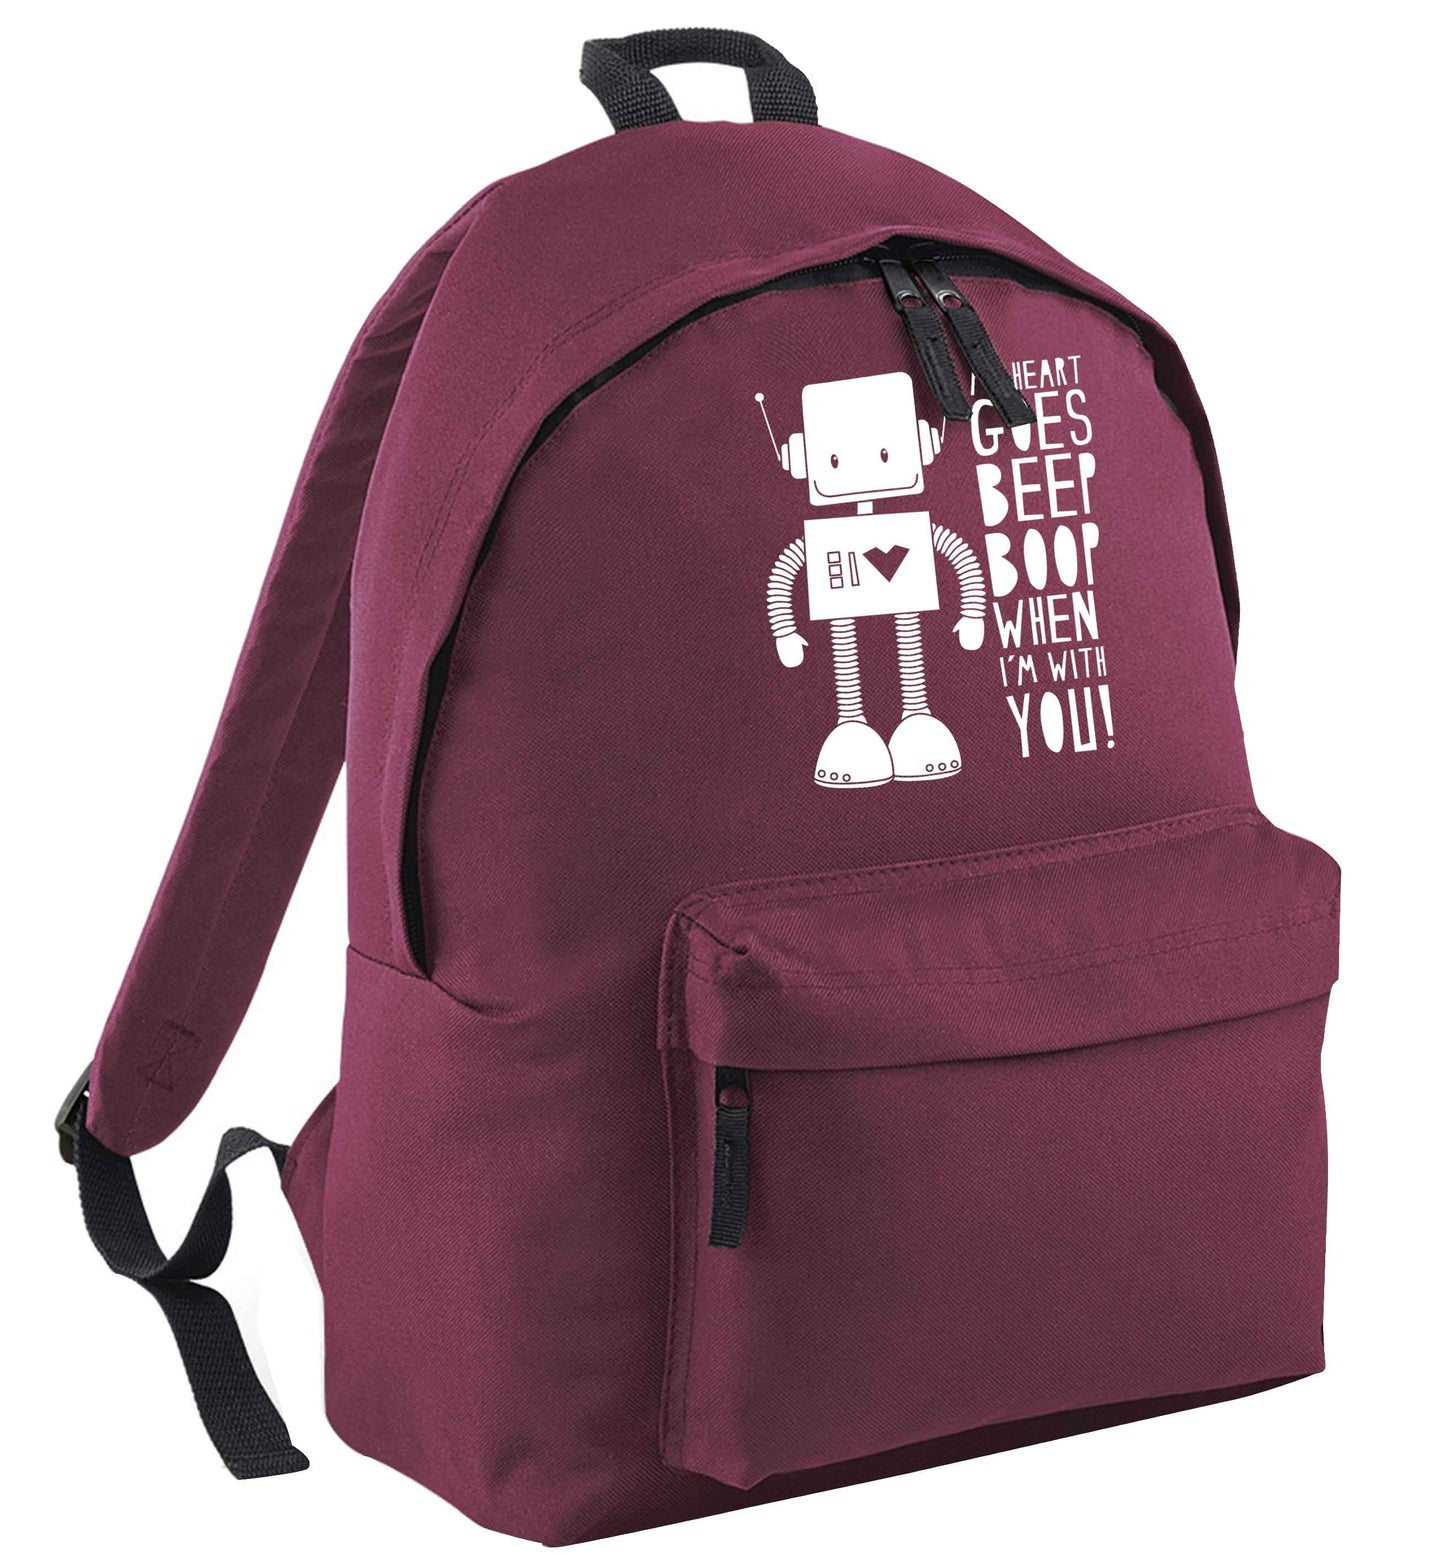 My heart goes beep boop when I'm with you maroon adults backpack